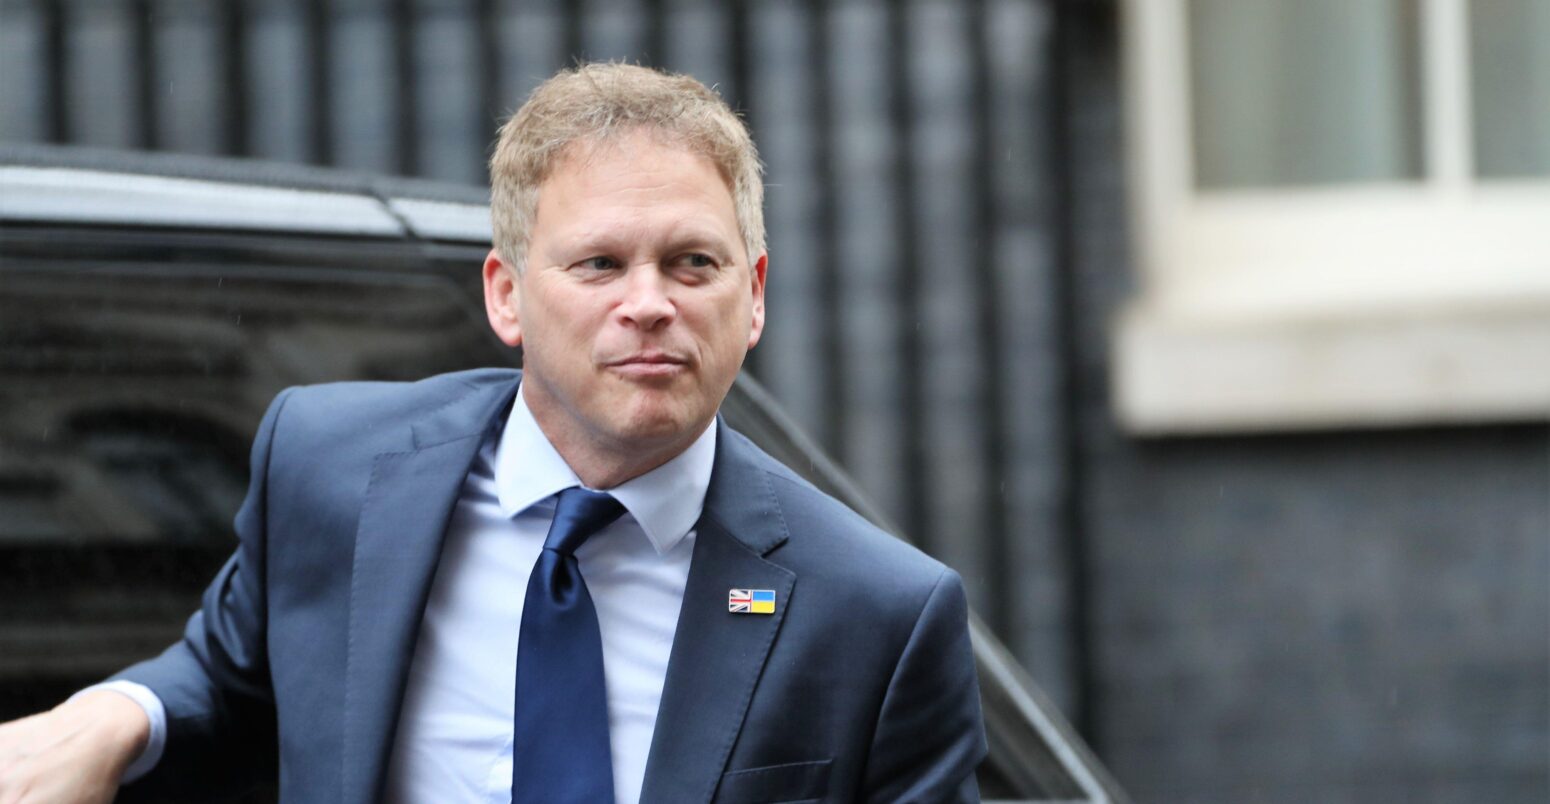 Secretary Grant Shapps arrives for a Cabinet Meeting in Downing Street on 28 March 2023.